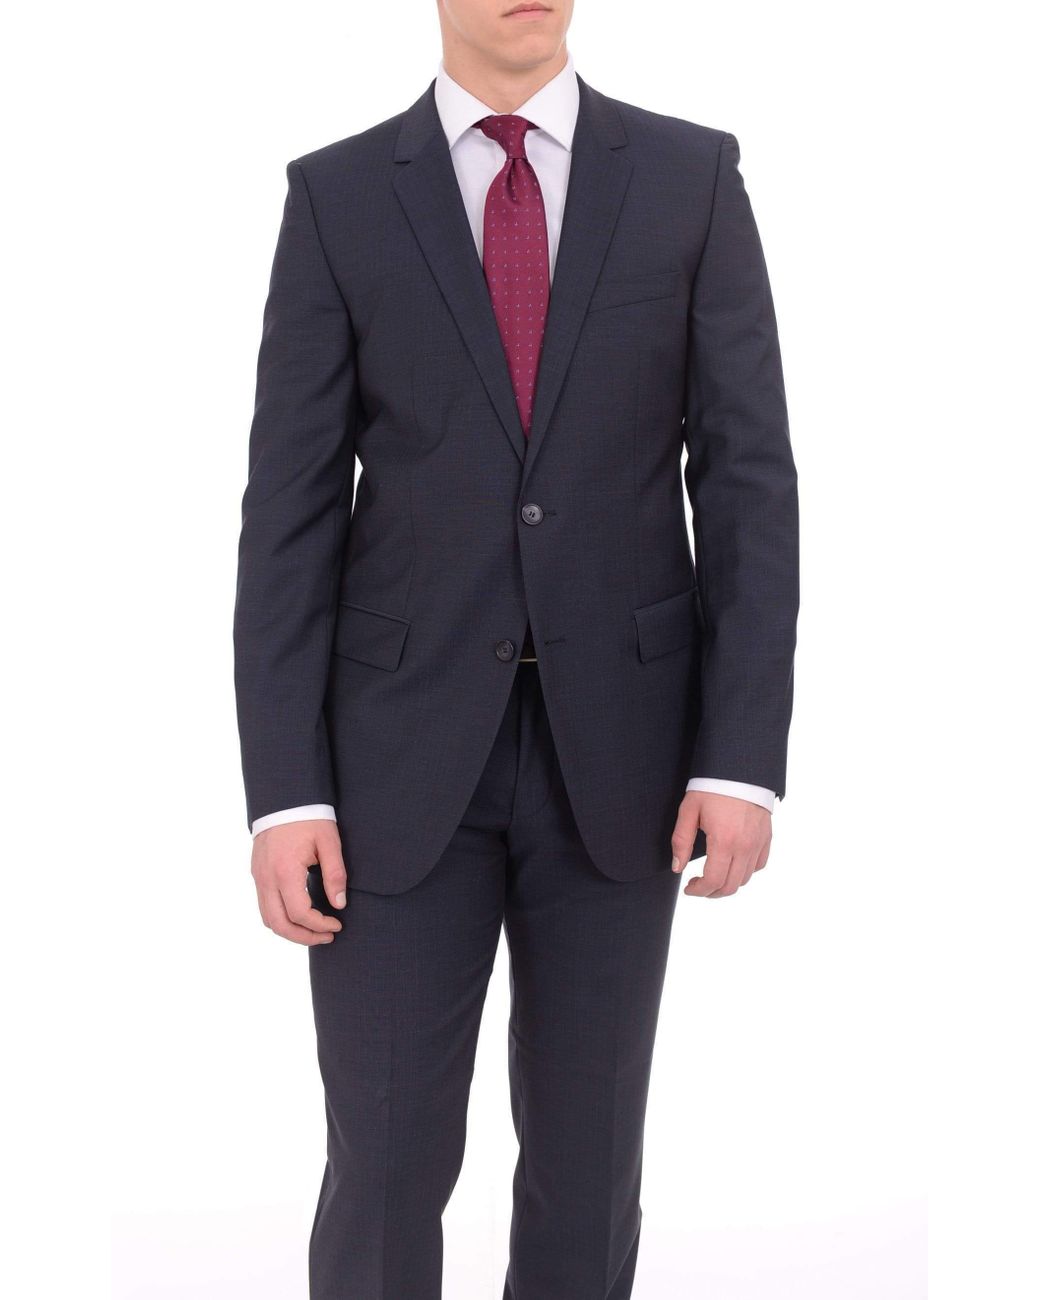 BOSS by HUGO BOSS Aamon/hago Slim Fit Navy Textured Two Button Wool Suit in  Blue for Men - Lyst